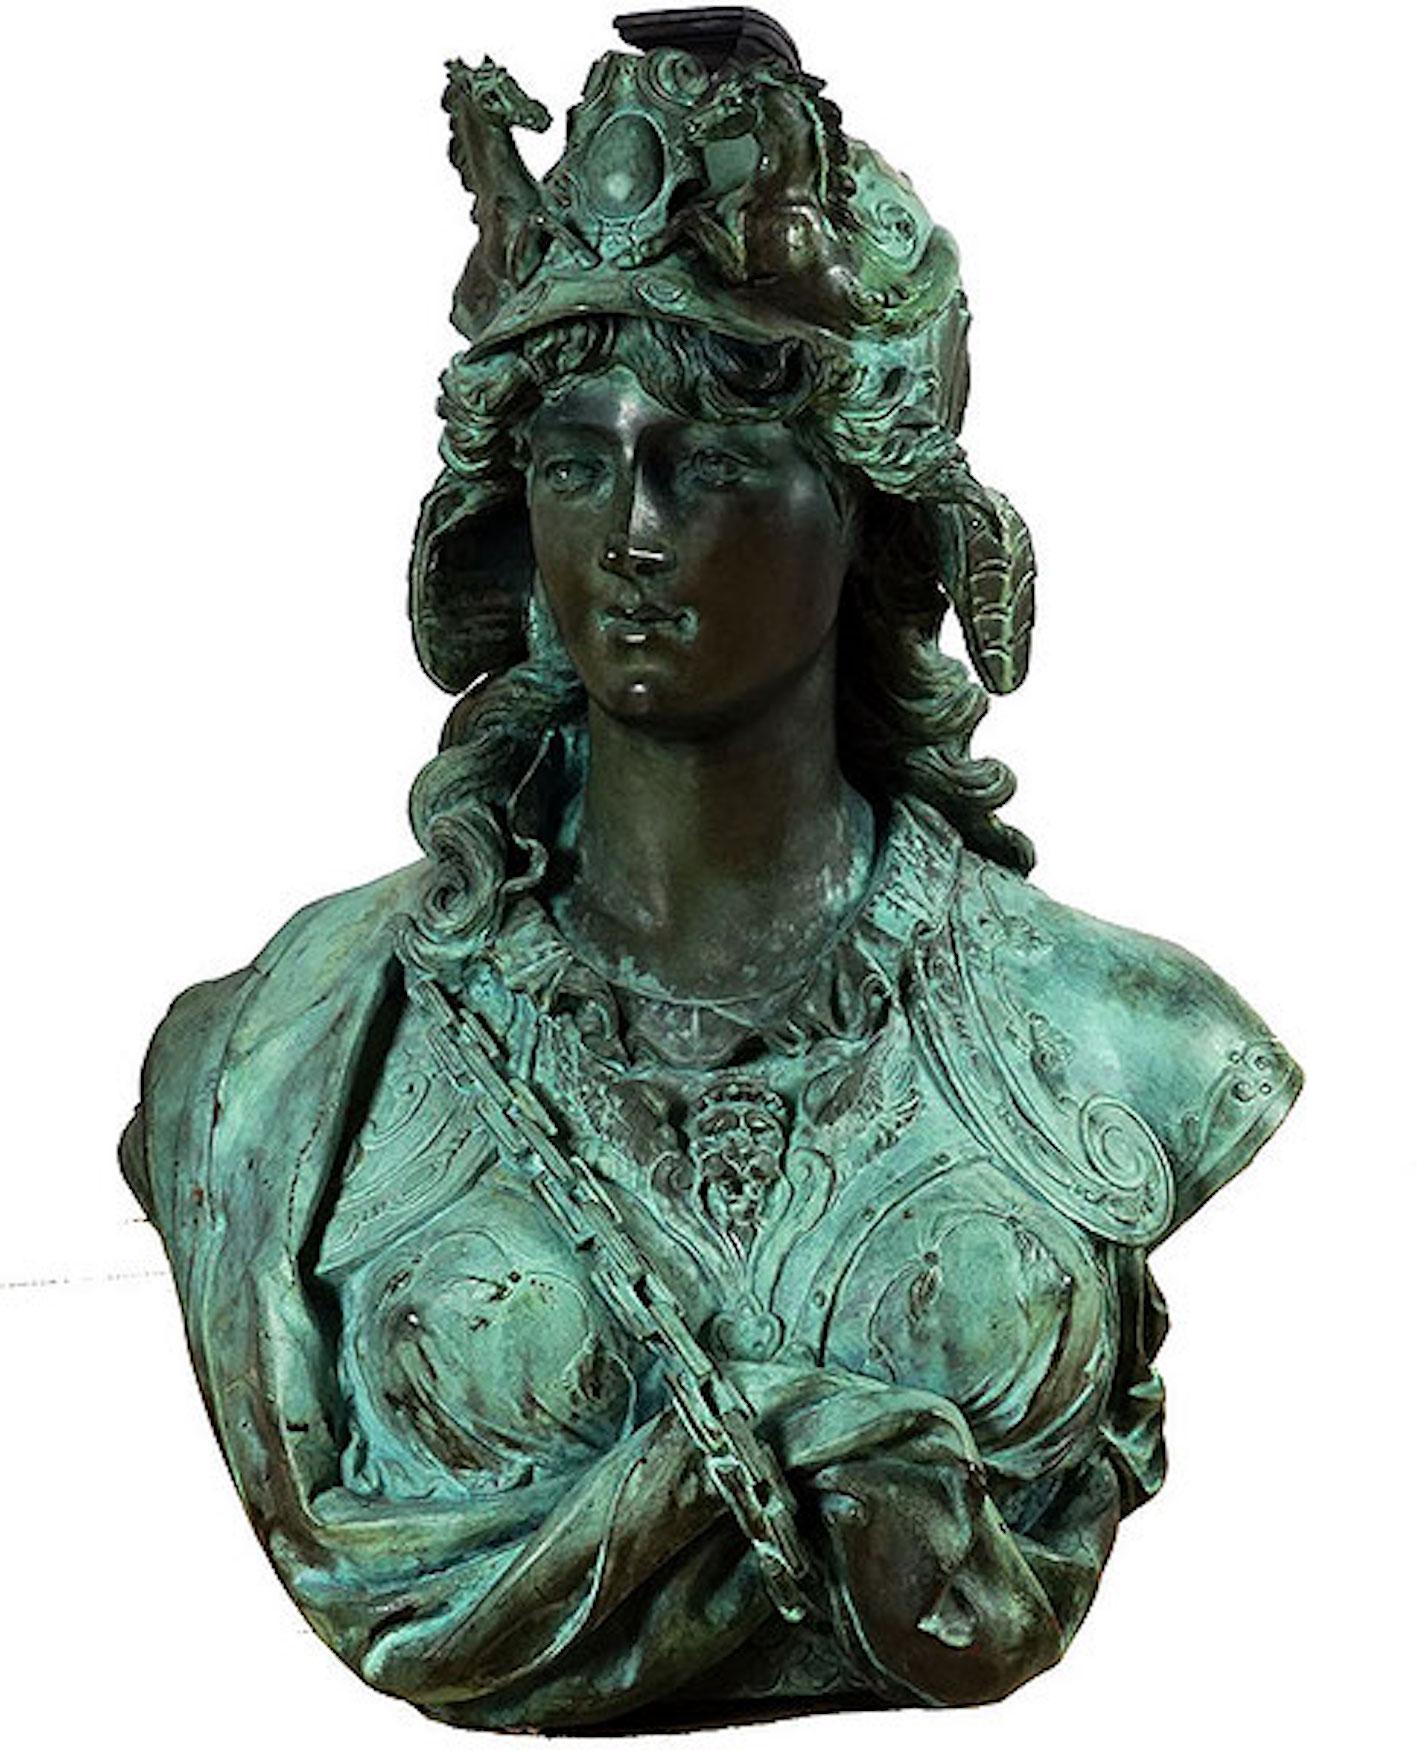 Important pair of patinated cast bronze busts representing goddesses Mars and Minerva. Beautifully cast in the Renaissance Beaux Arts style, featuring cherubs , sea horses and classical attribute, retaining a weathered verdigris patinas from being